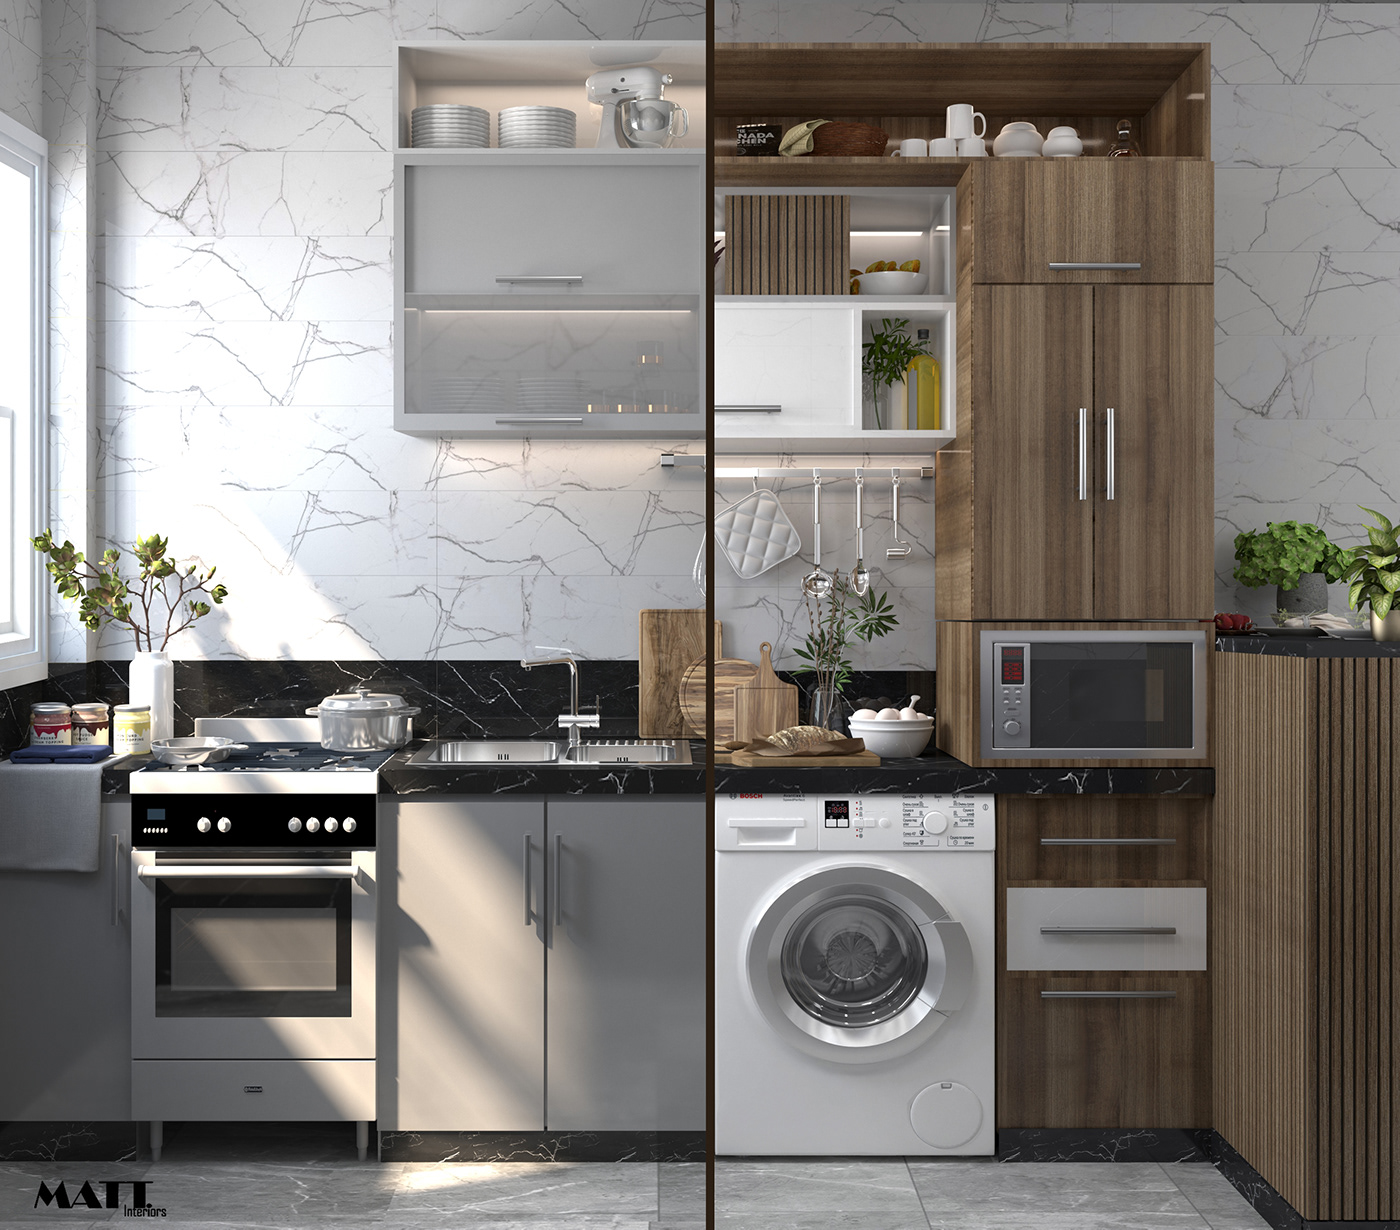 home appliance 3d modeling Render architecture 3ds max visualization modern 3D vray